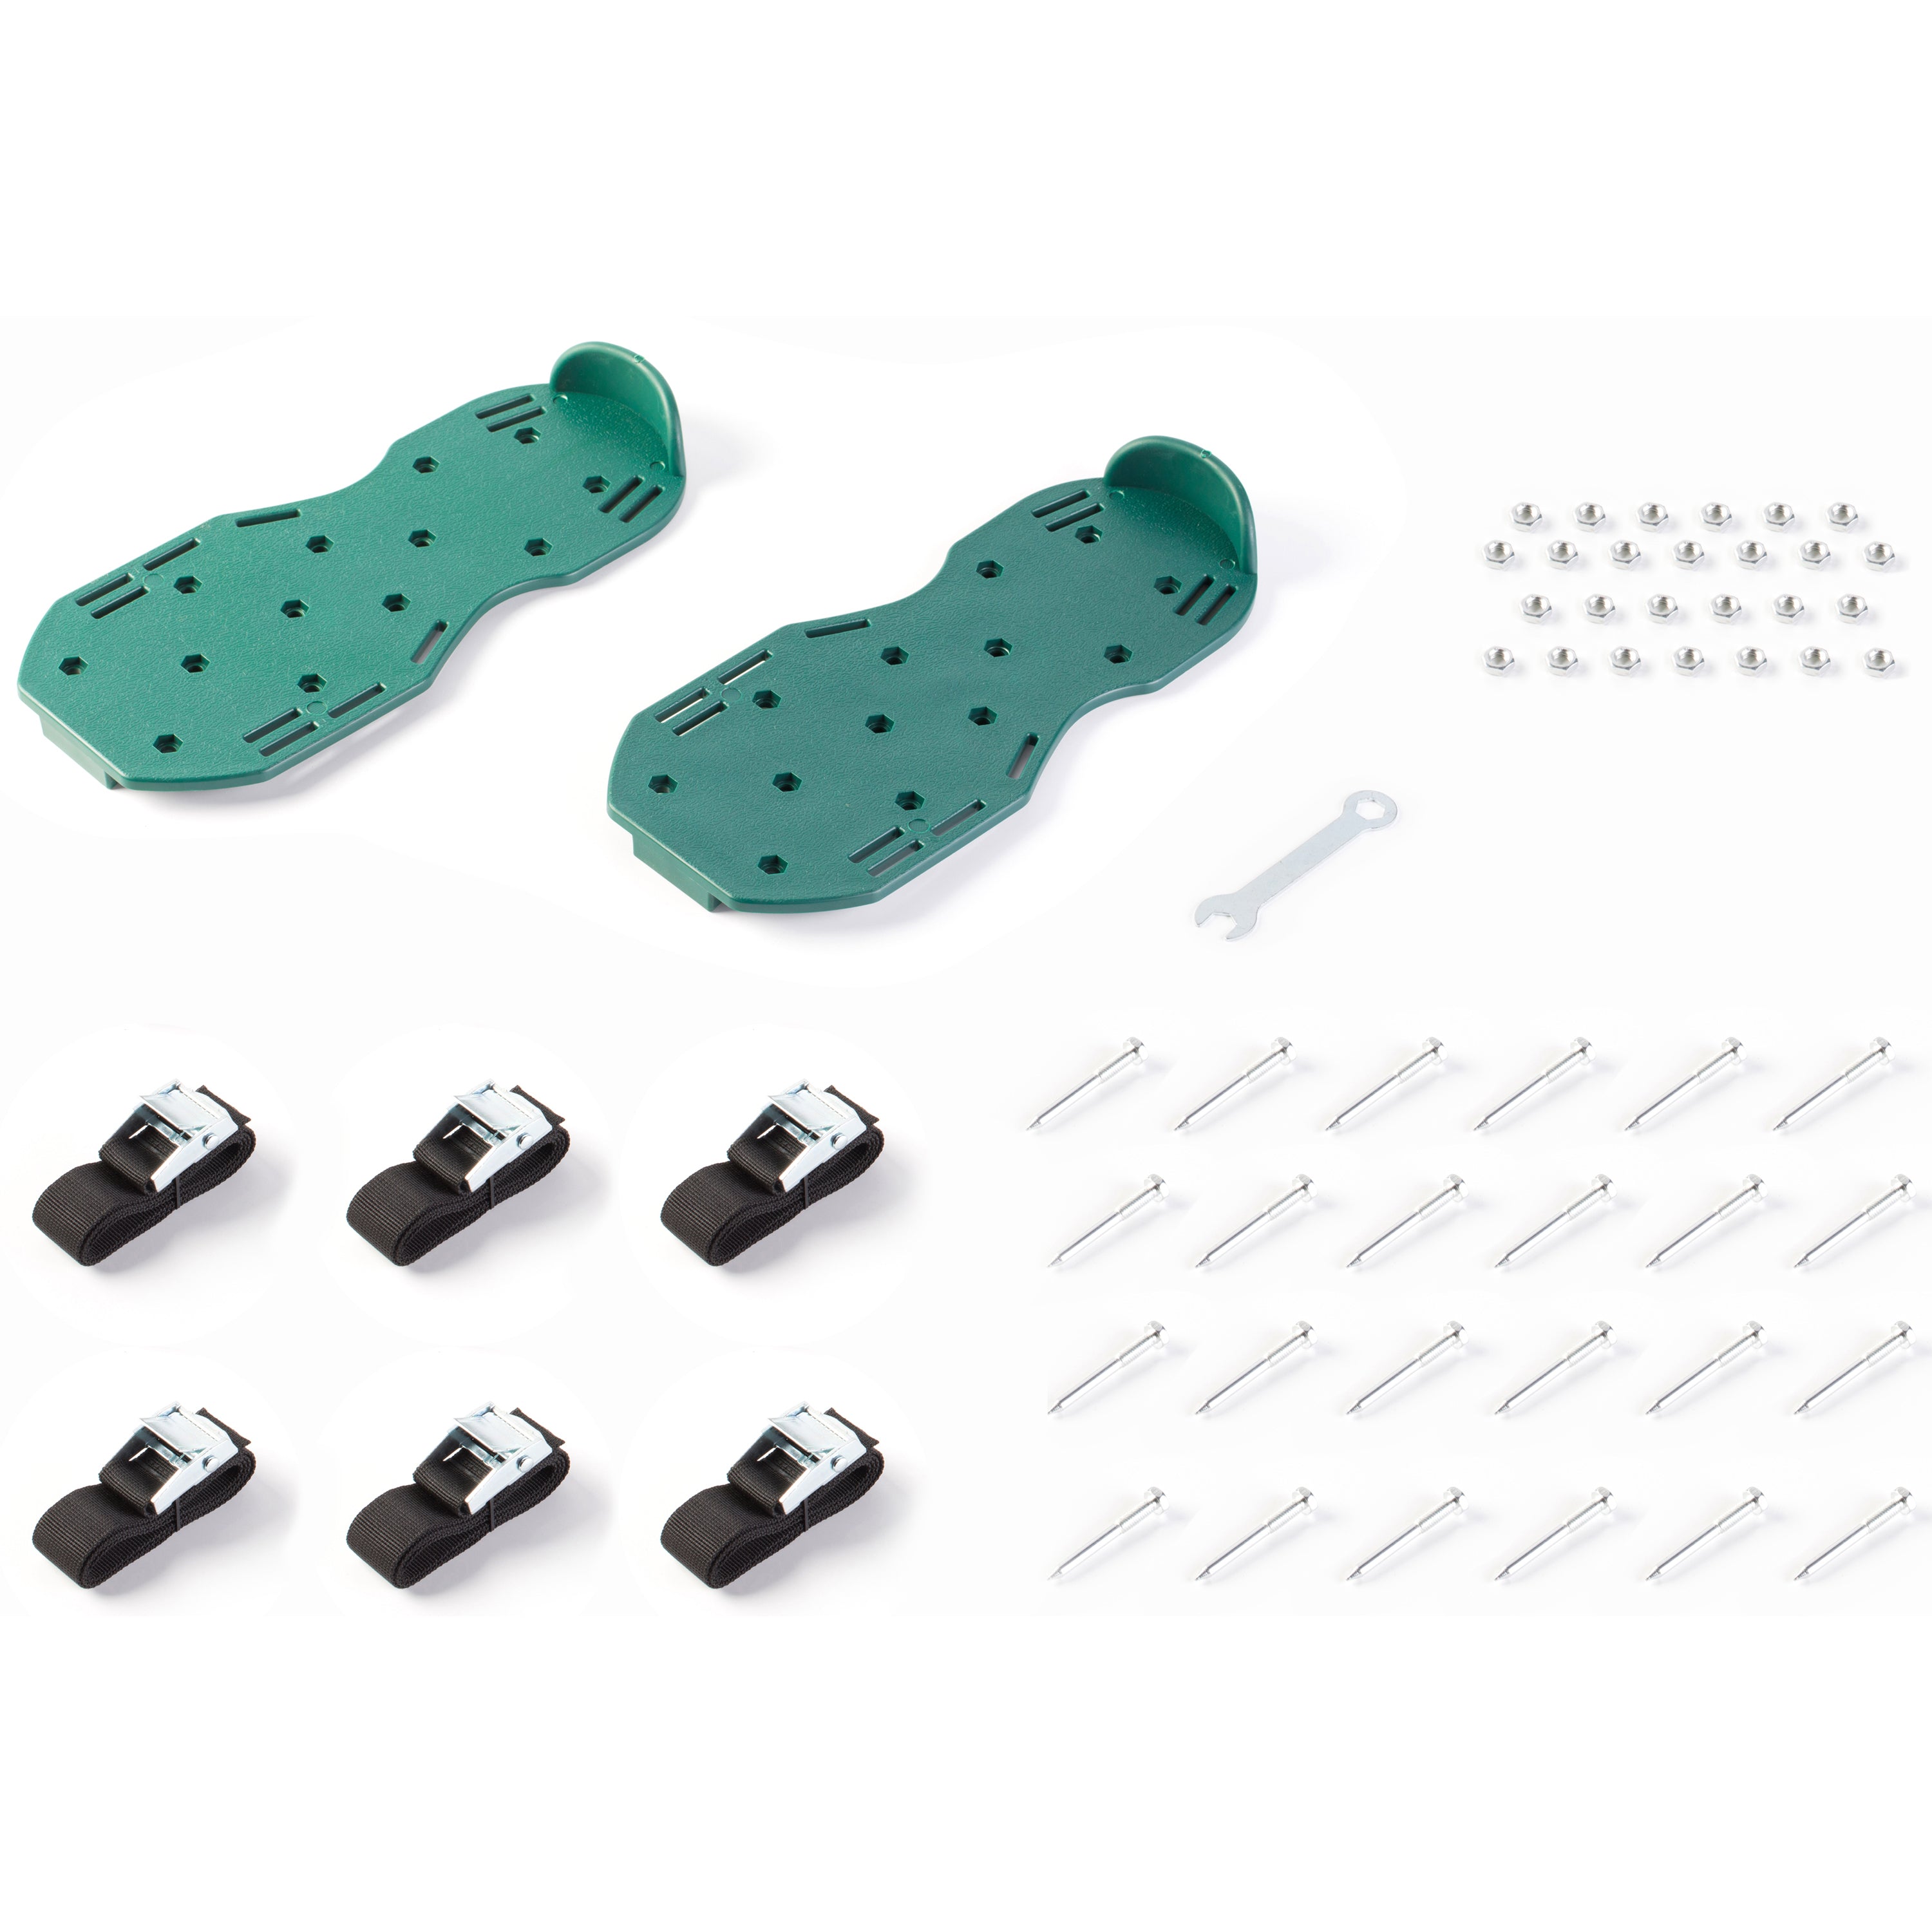 Gardenised Lawn and Garden Aerator Metal Spike Shoe